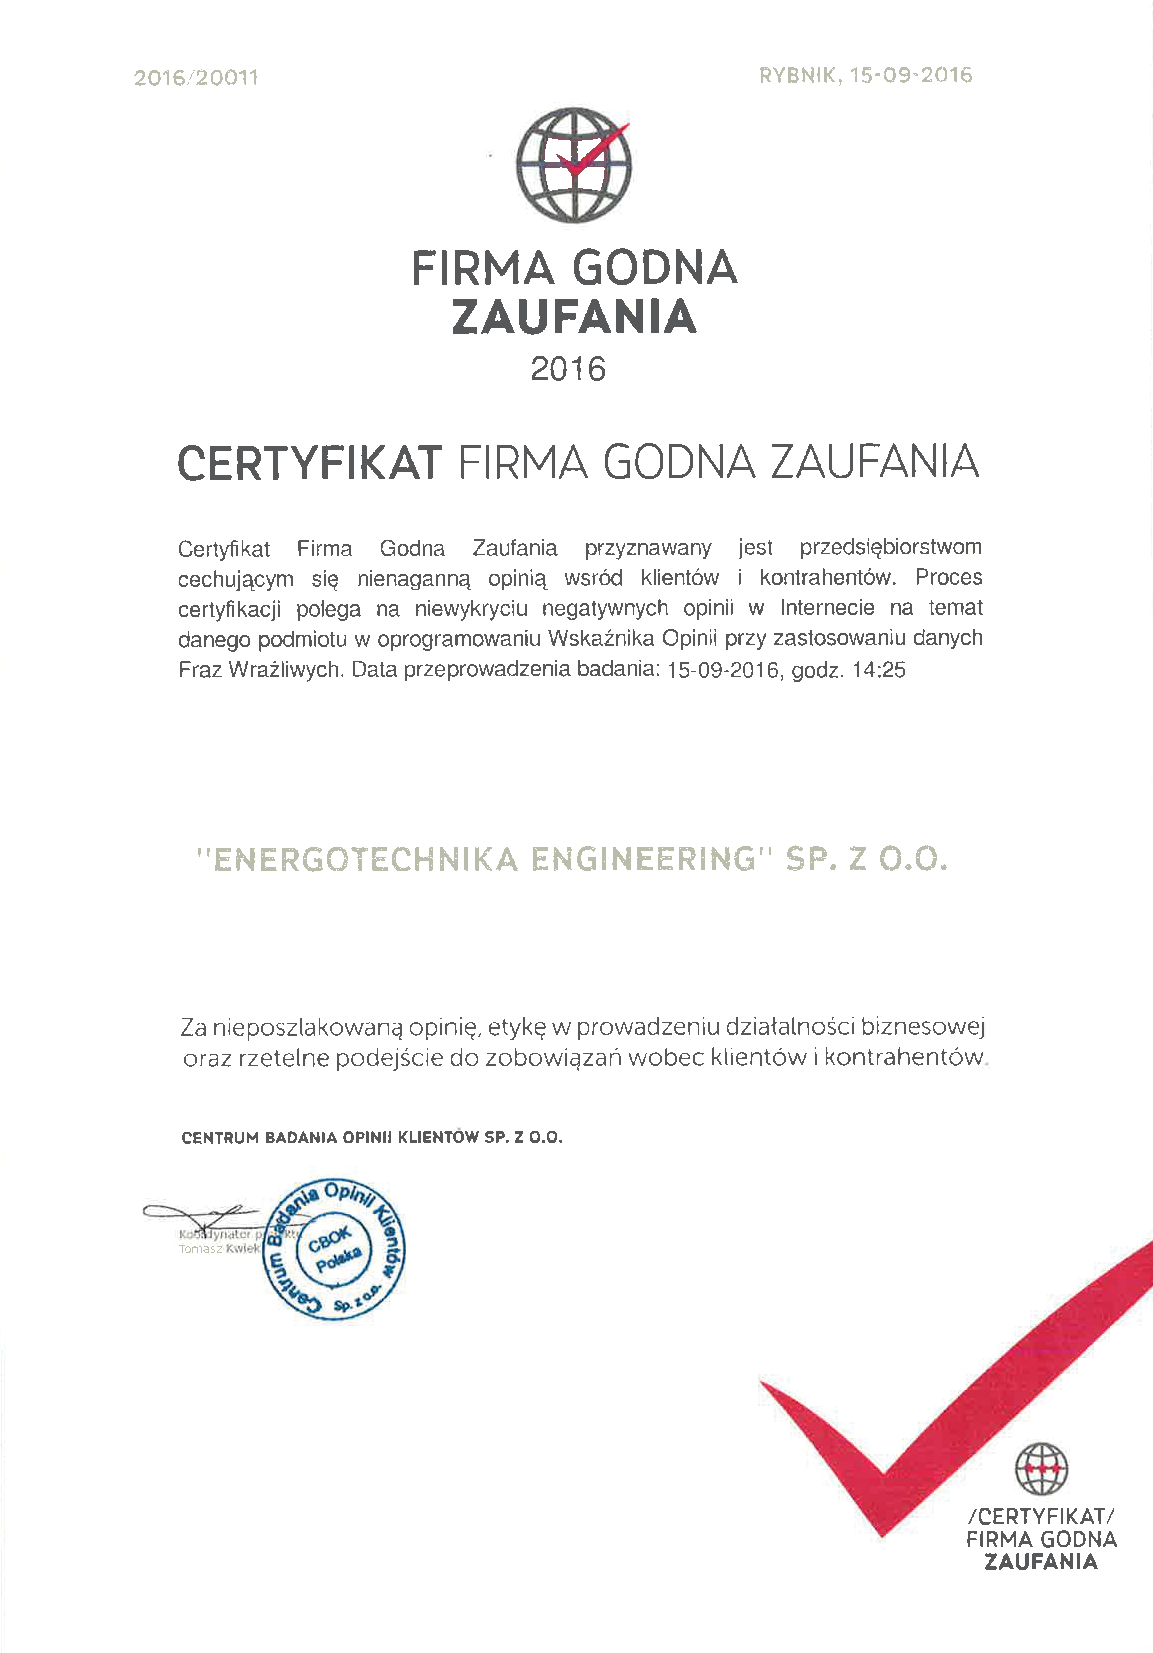 Reliable Company Certificate 2016